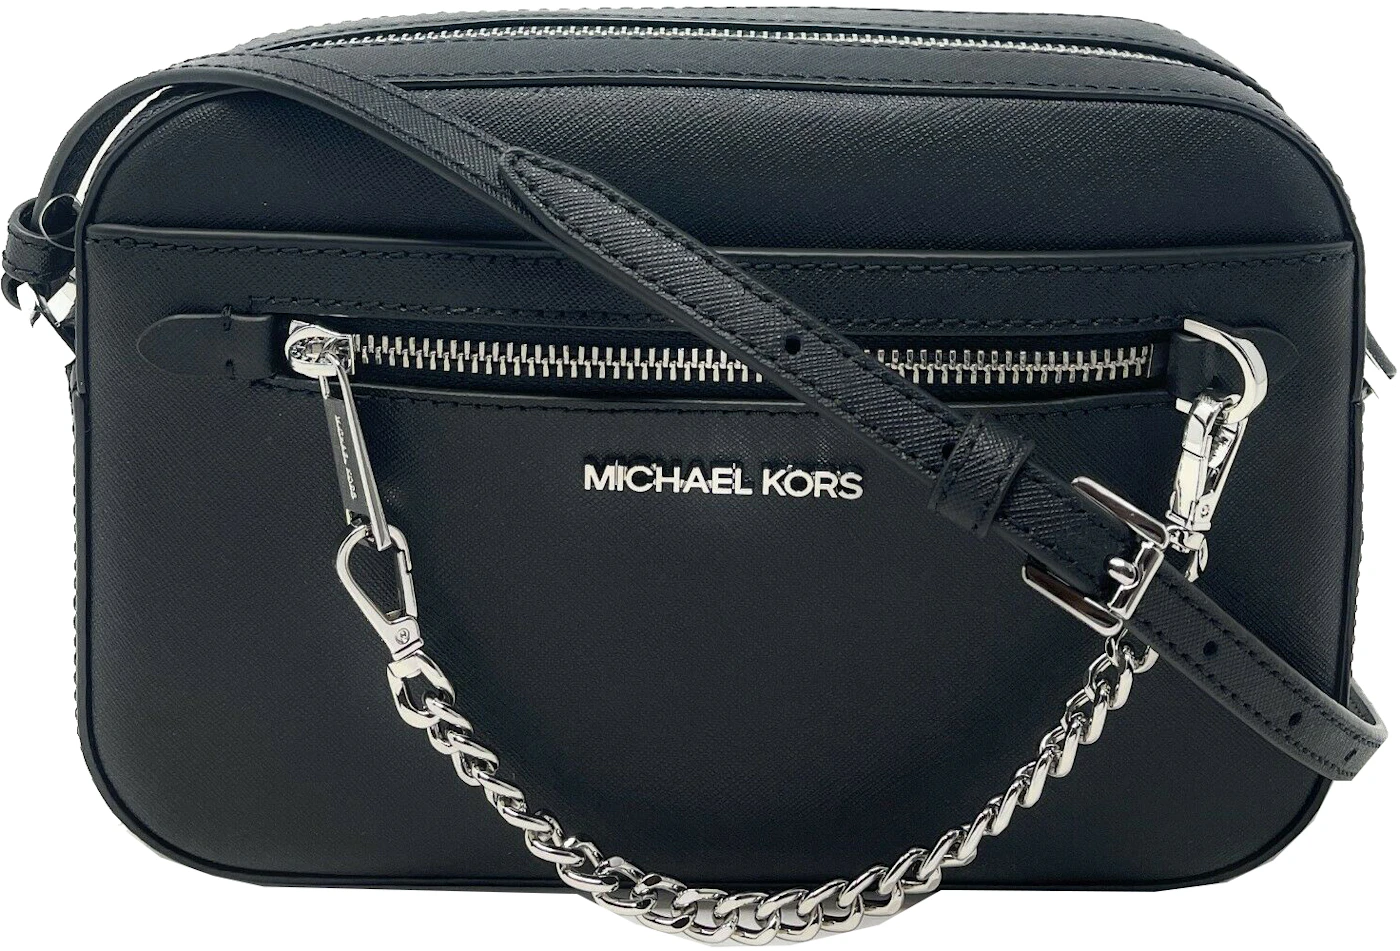 Michael Kors Jet Zip Chain Crossbody Bag Large Black/Silver in Saffiano Leather with Silver-tone - US